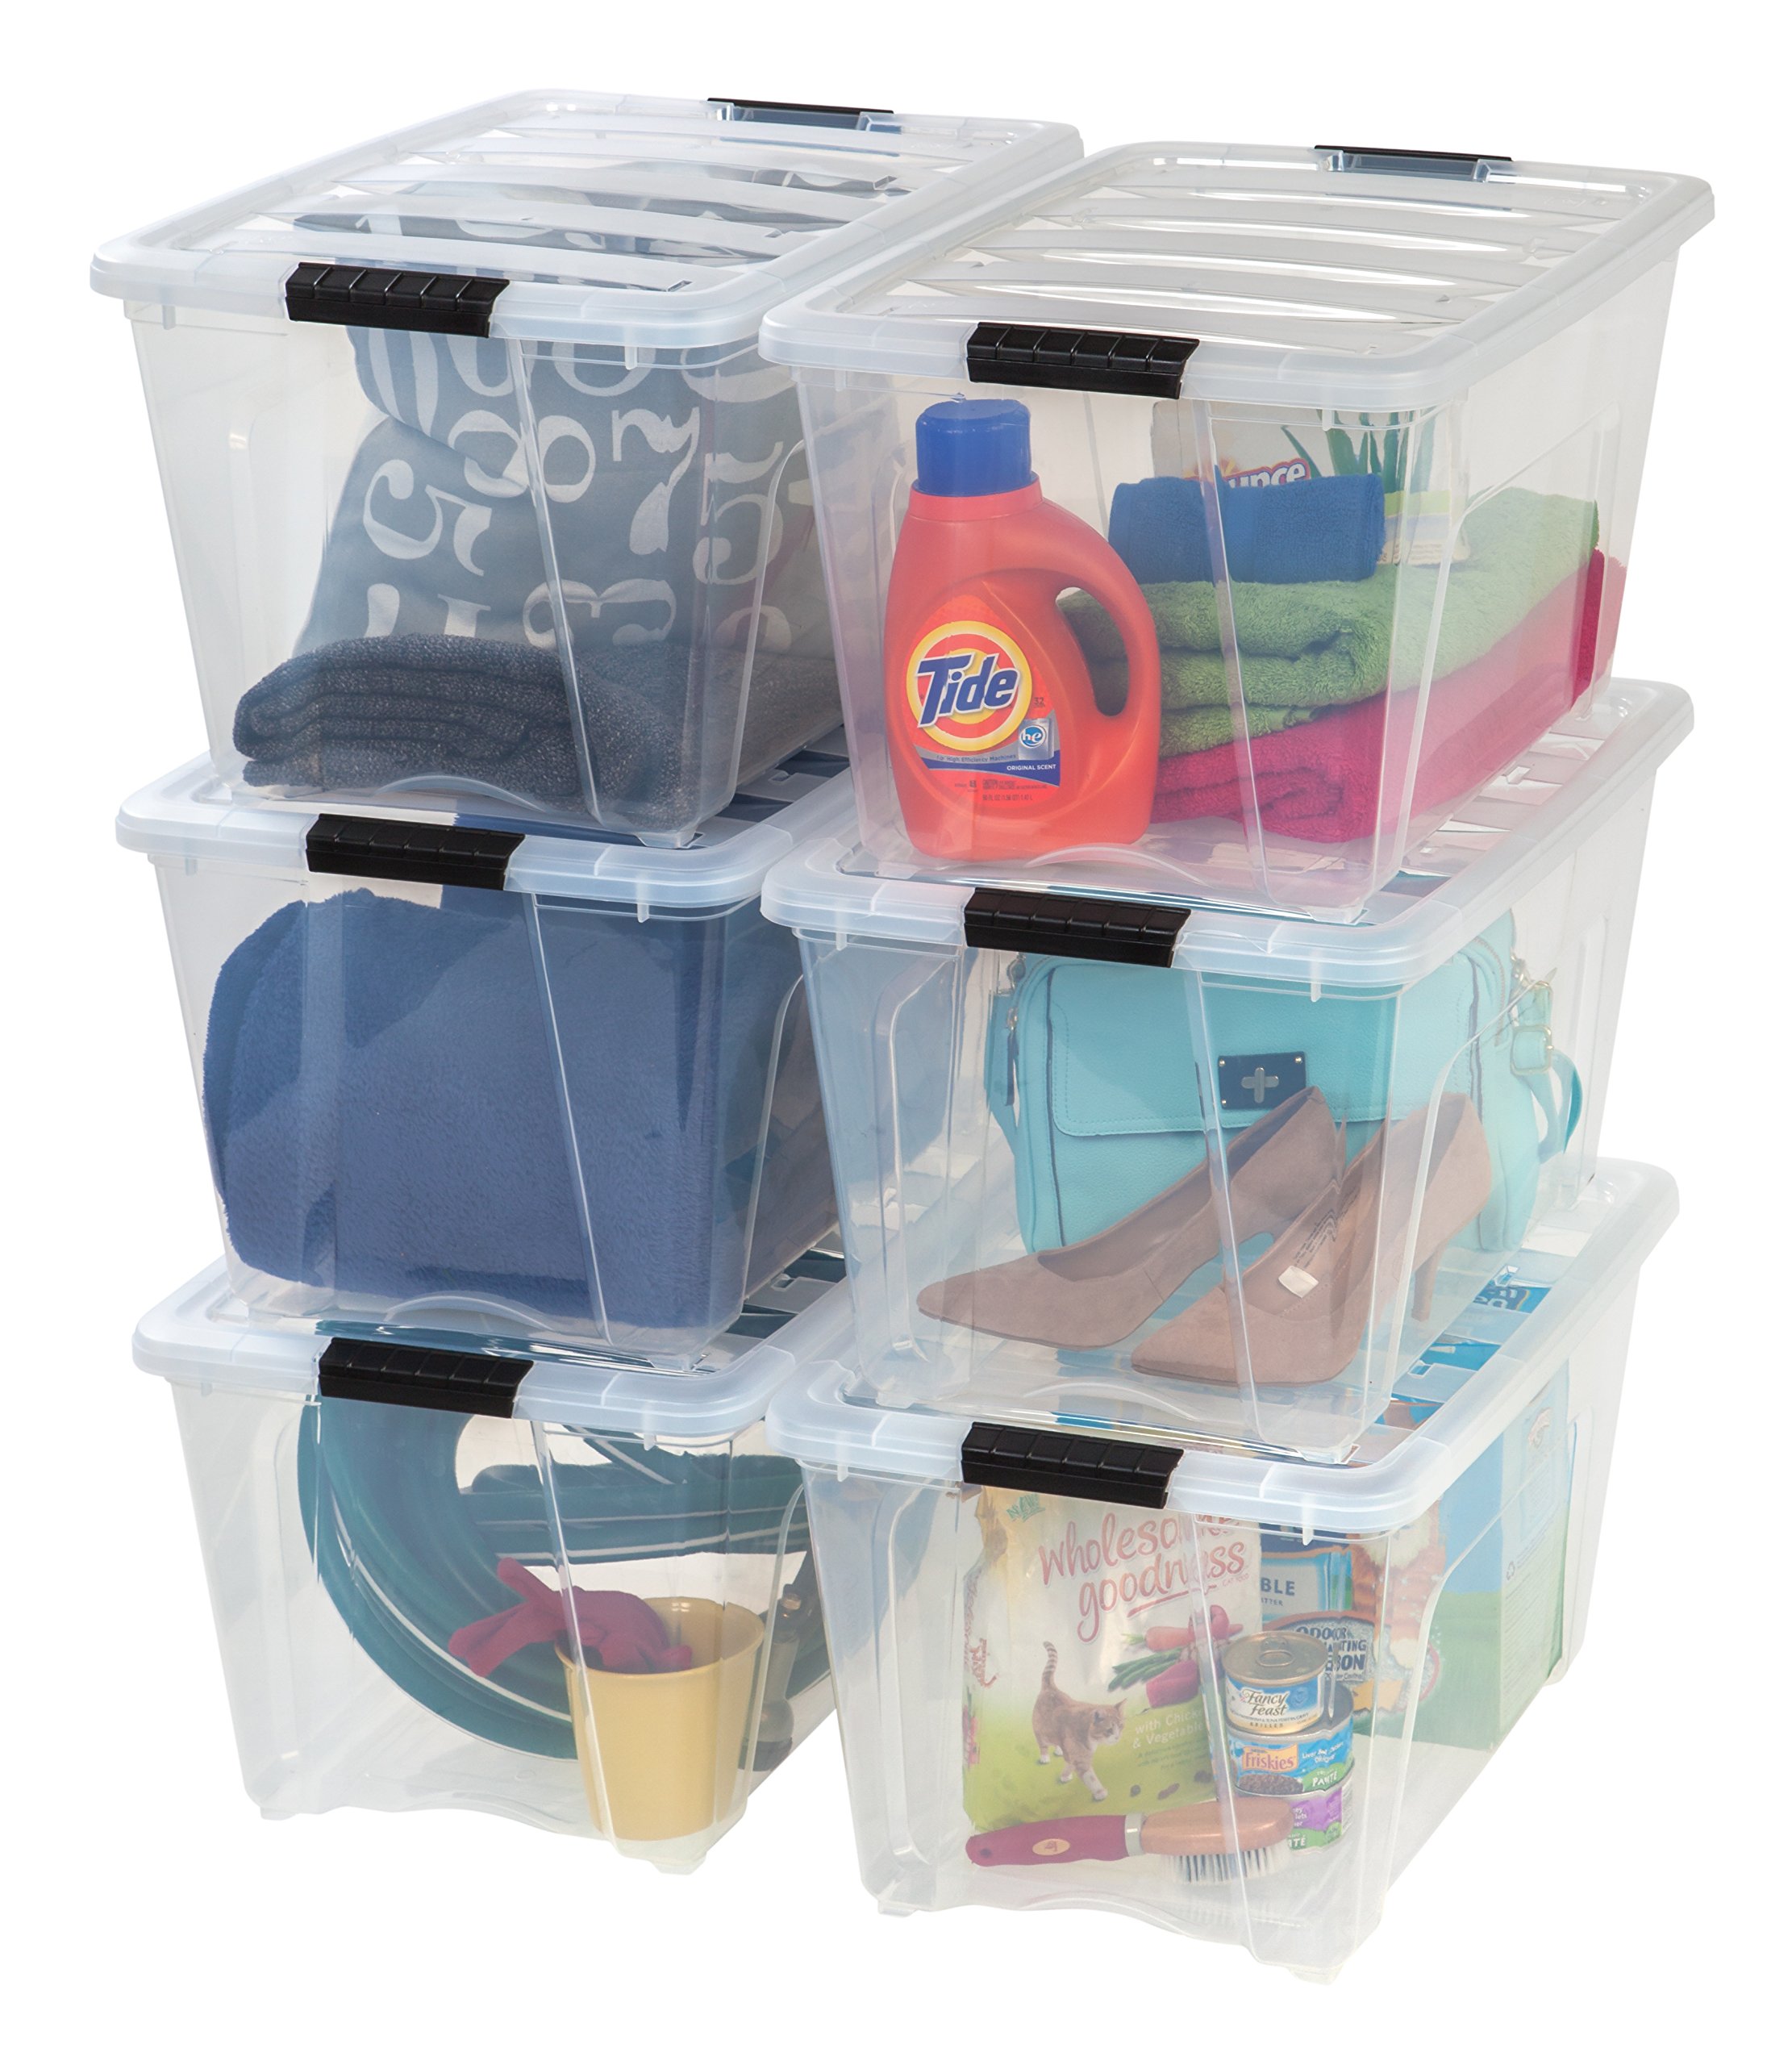  IRIS USA, Inc. IRIS USA 53 Quart Stackable Plastic Storage Bins with Lids and Latching Buckles, 6 Pack - Clear, Containers with Lids and Latches, Durable Nestable Closet, Garage, Totes, Tub Boxes...